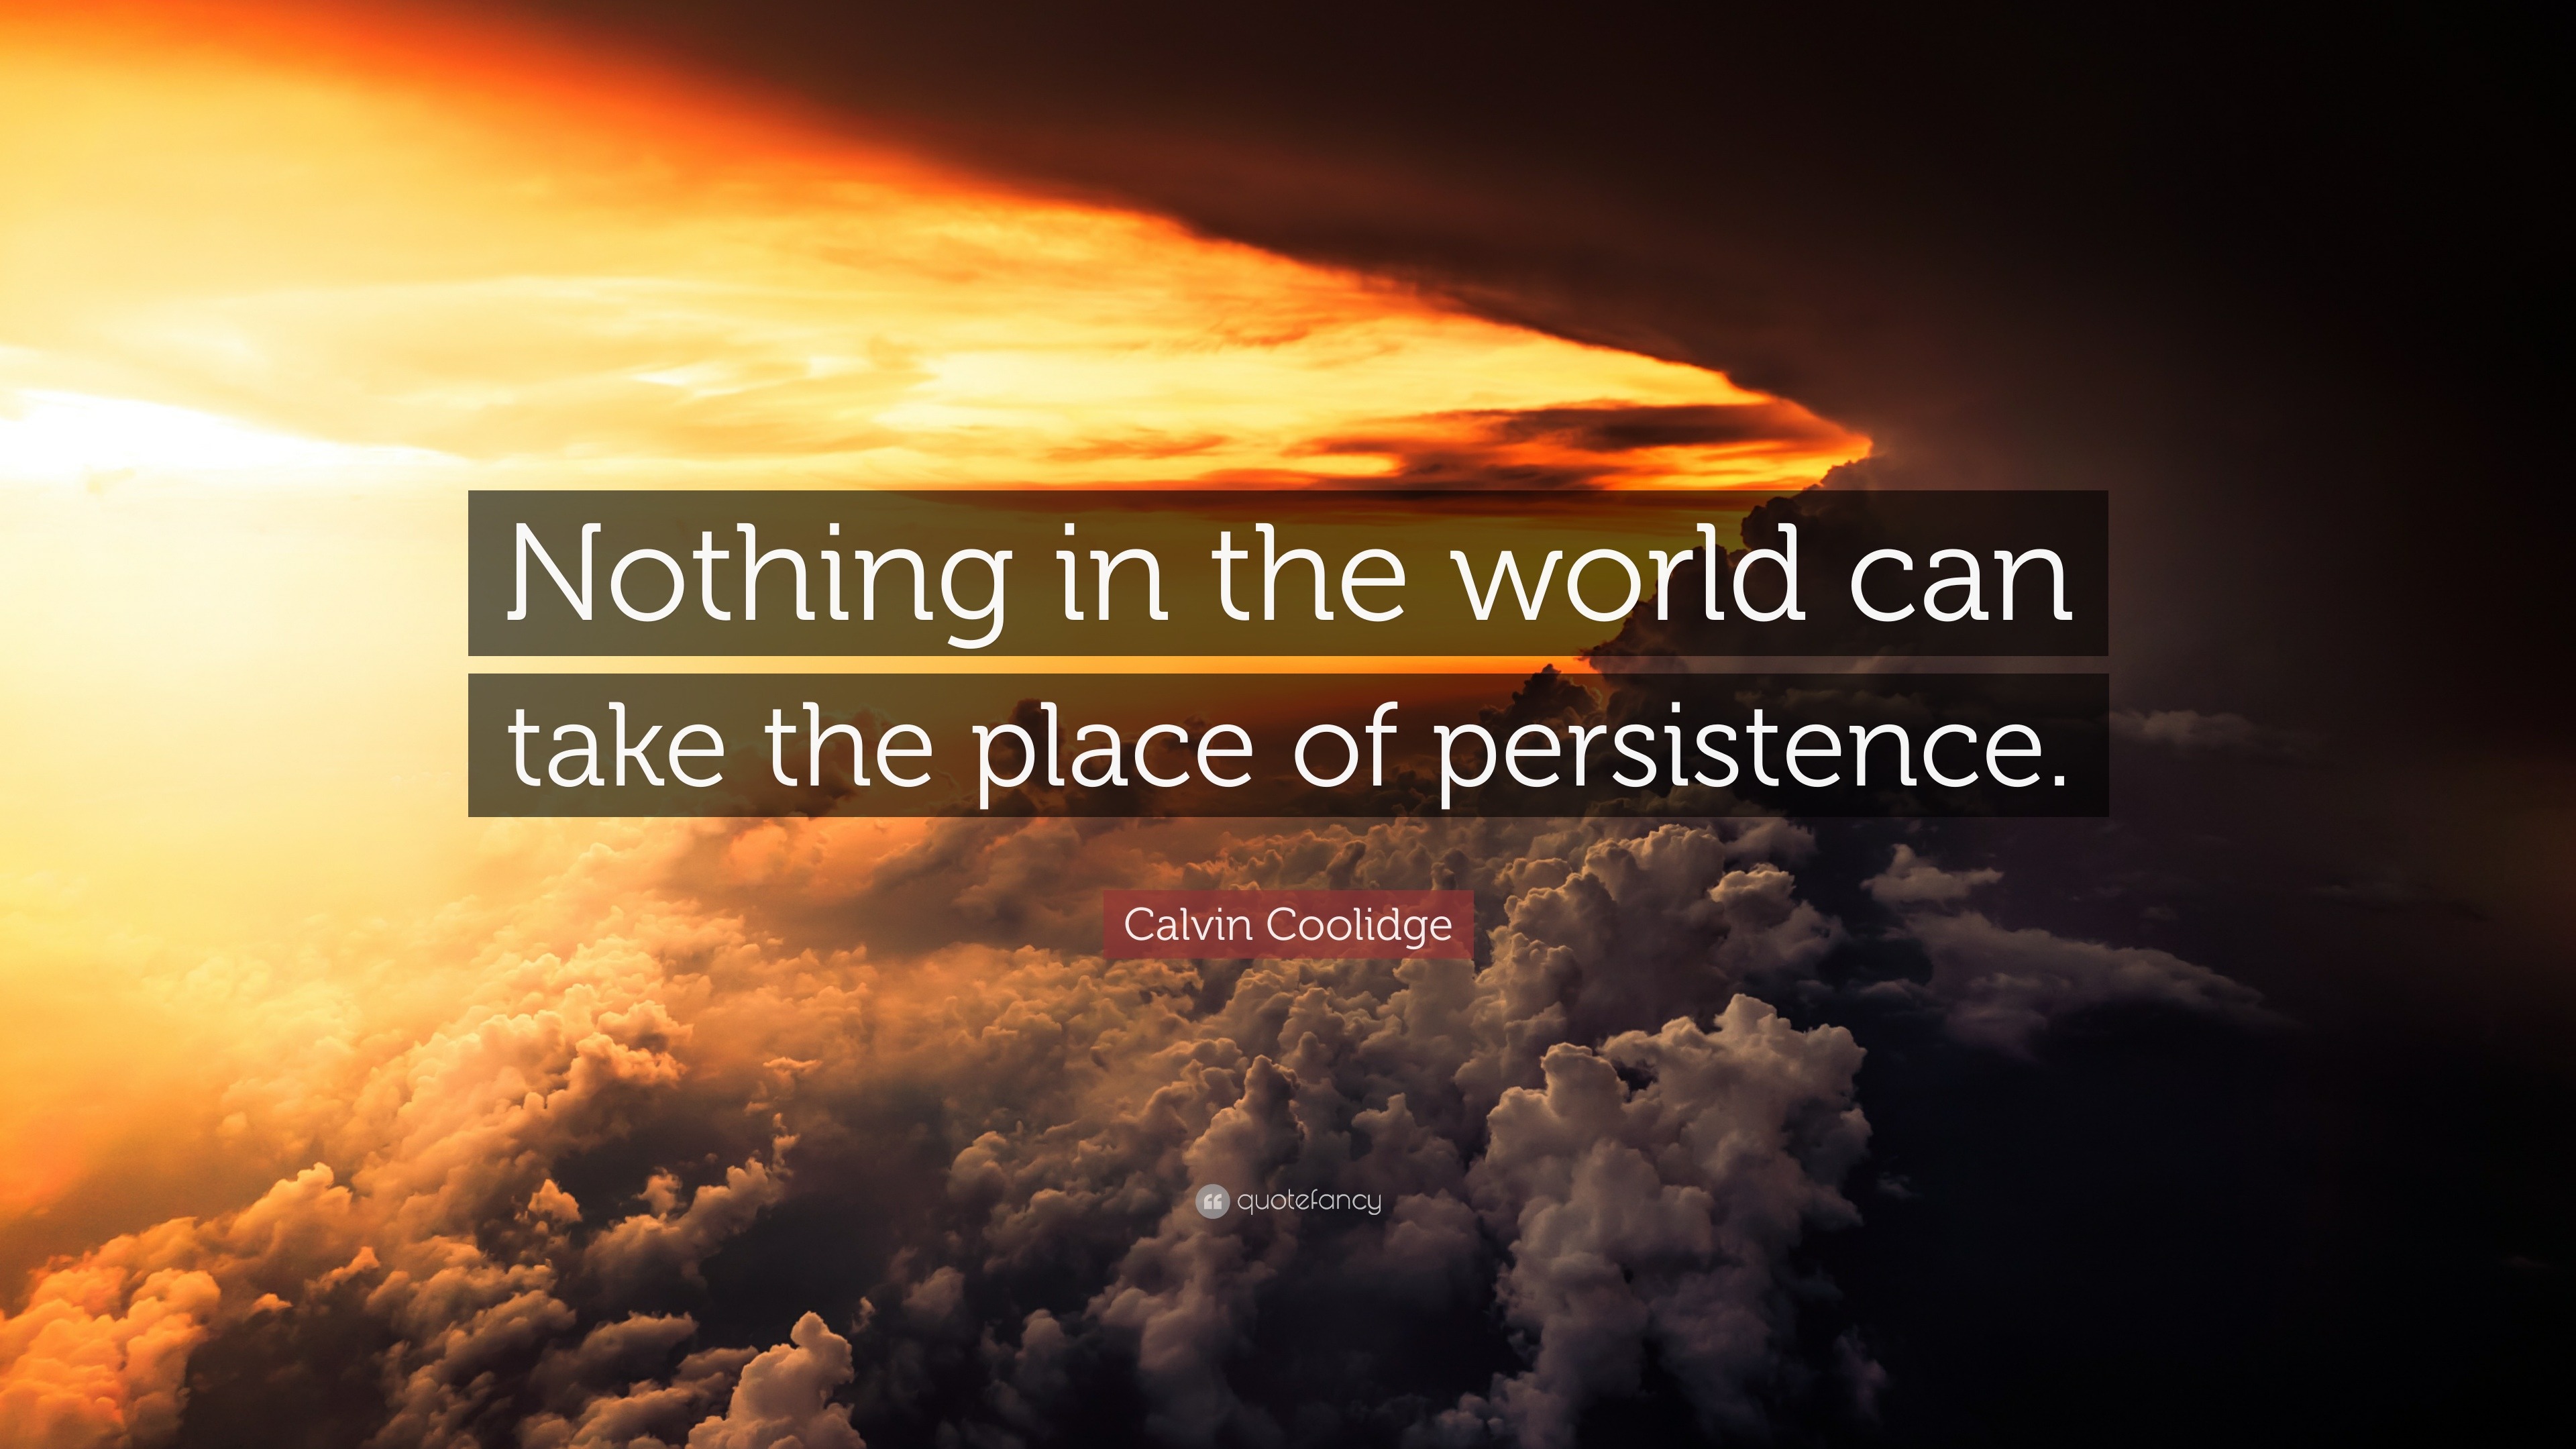 Calvin Coolidge Quote “Nothing in the world can take the place of